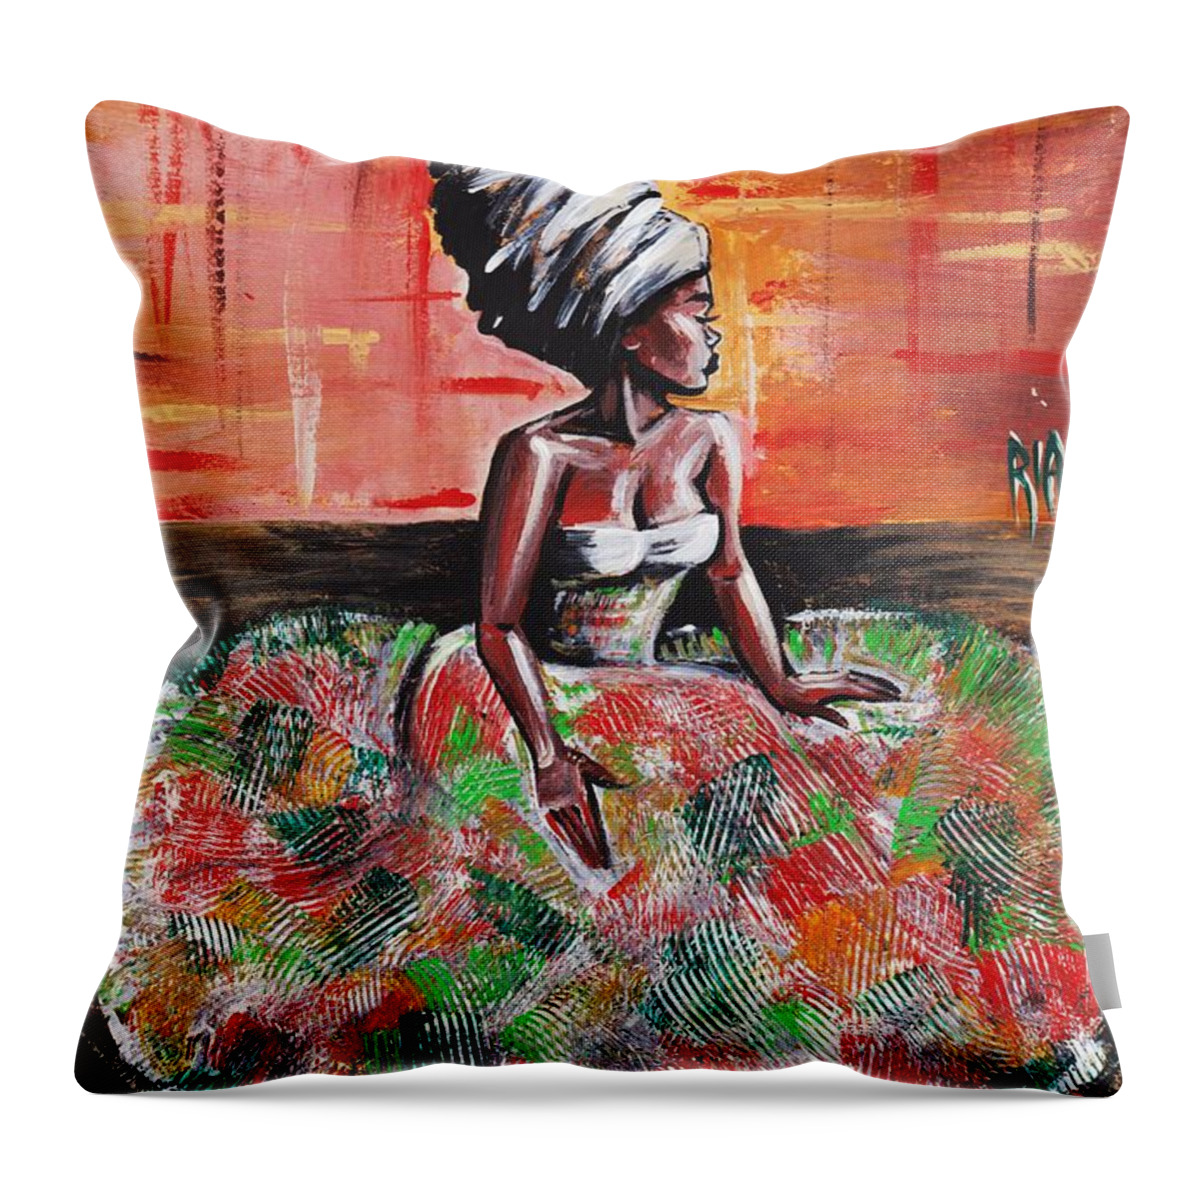 Stress Throw Pillow featuring the photograph Tranquil Moments #1 by Artist RiA